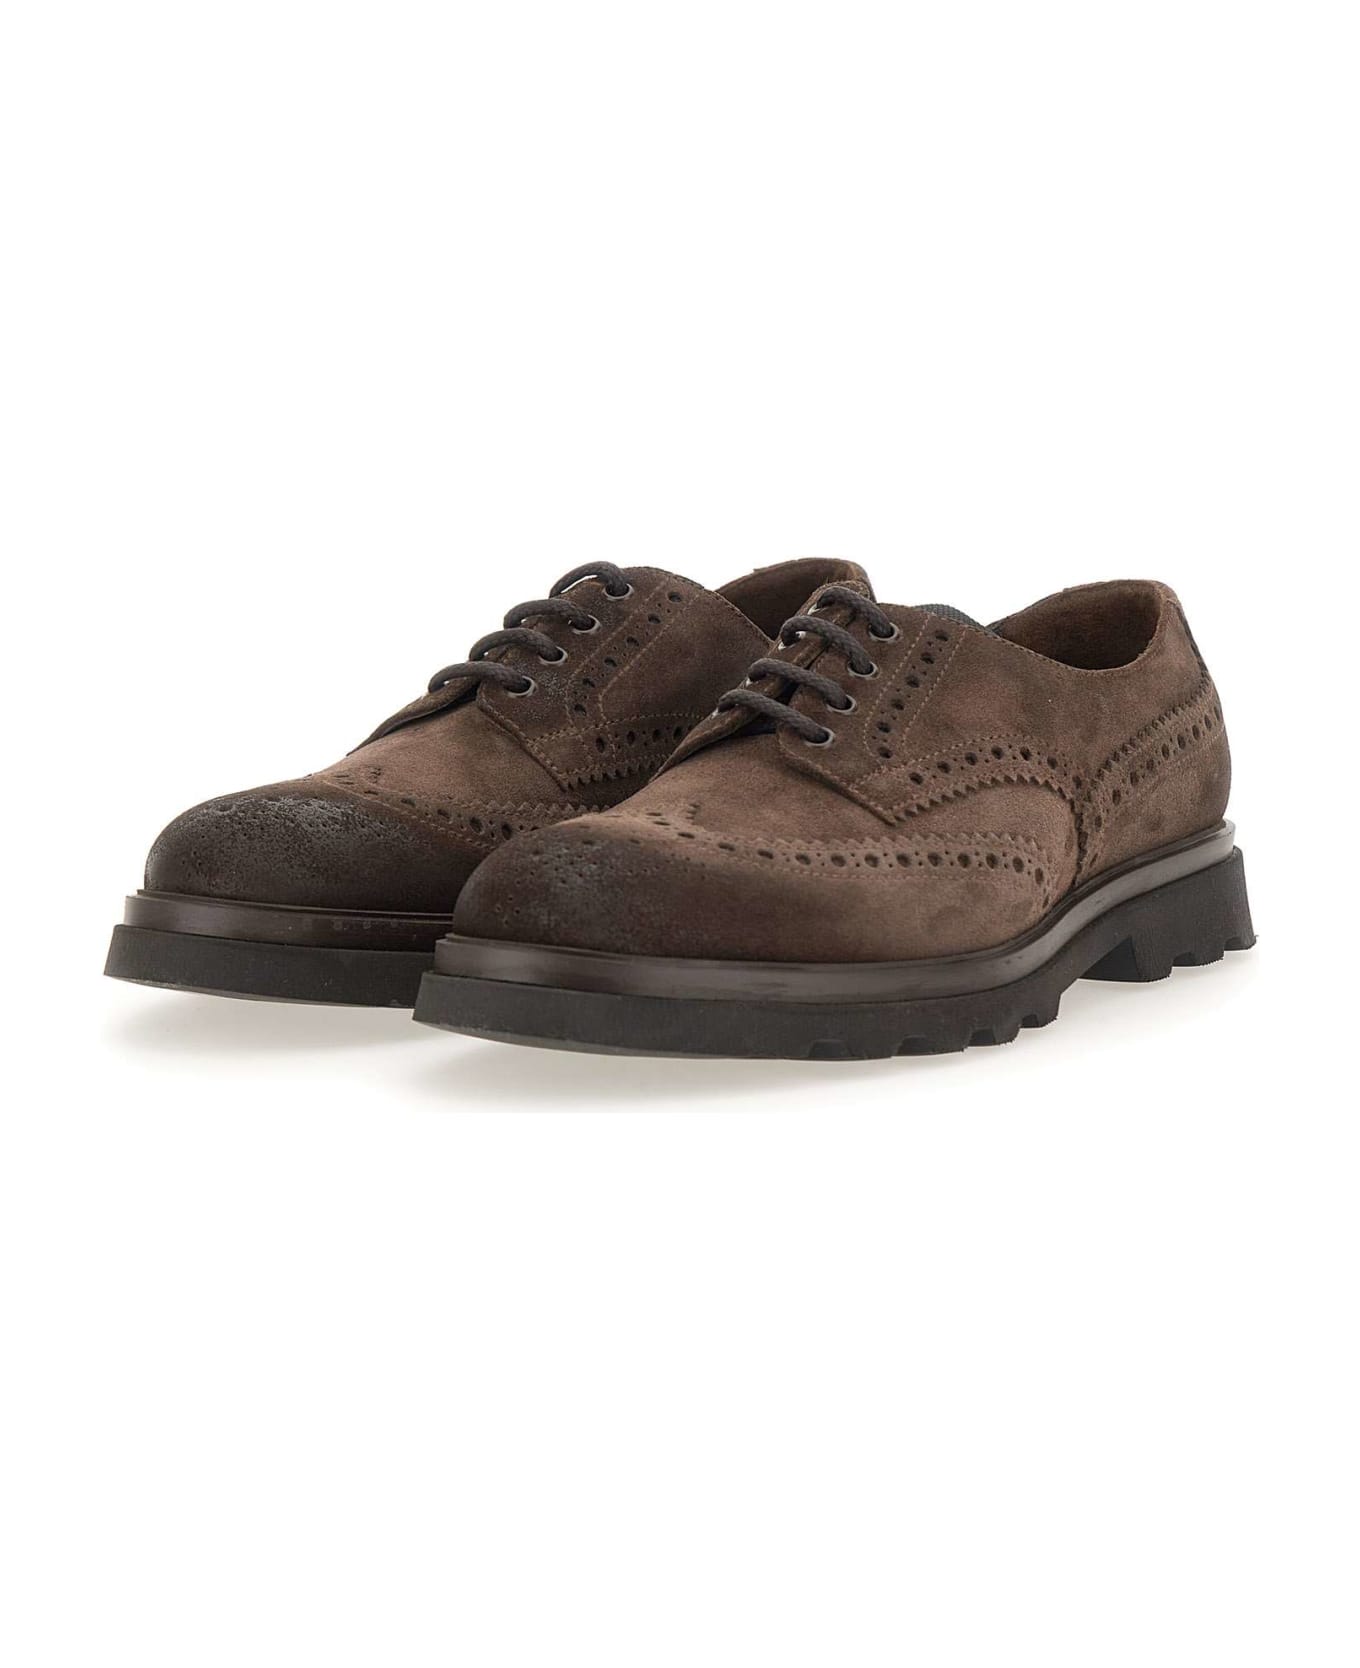 Doucal's "sally" Lace-up Shoe - BROWN